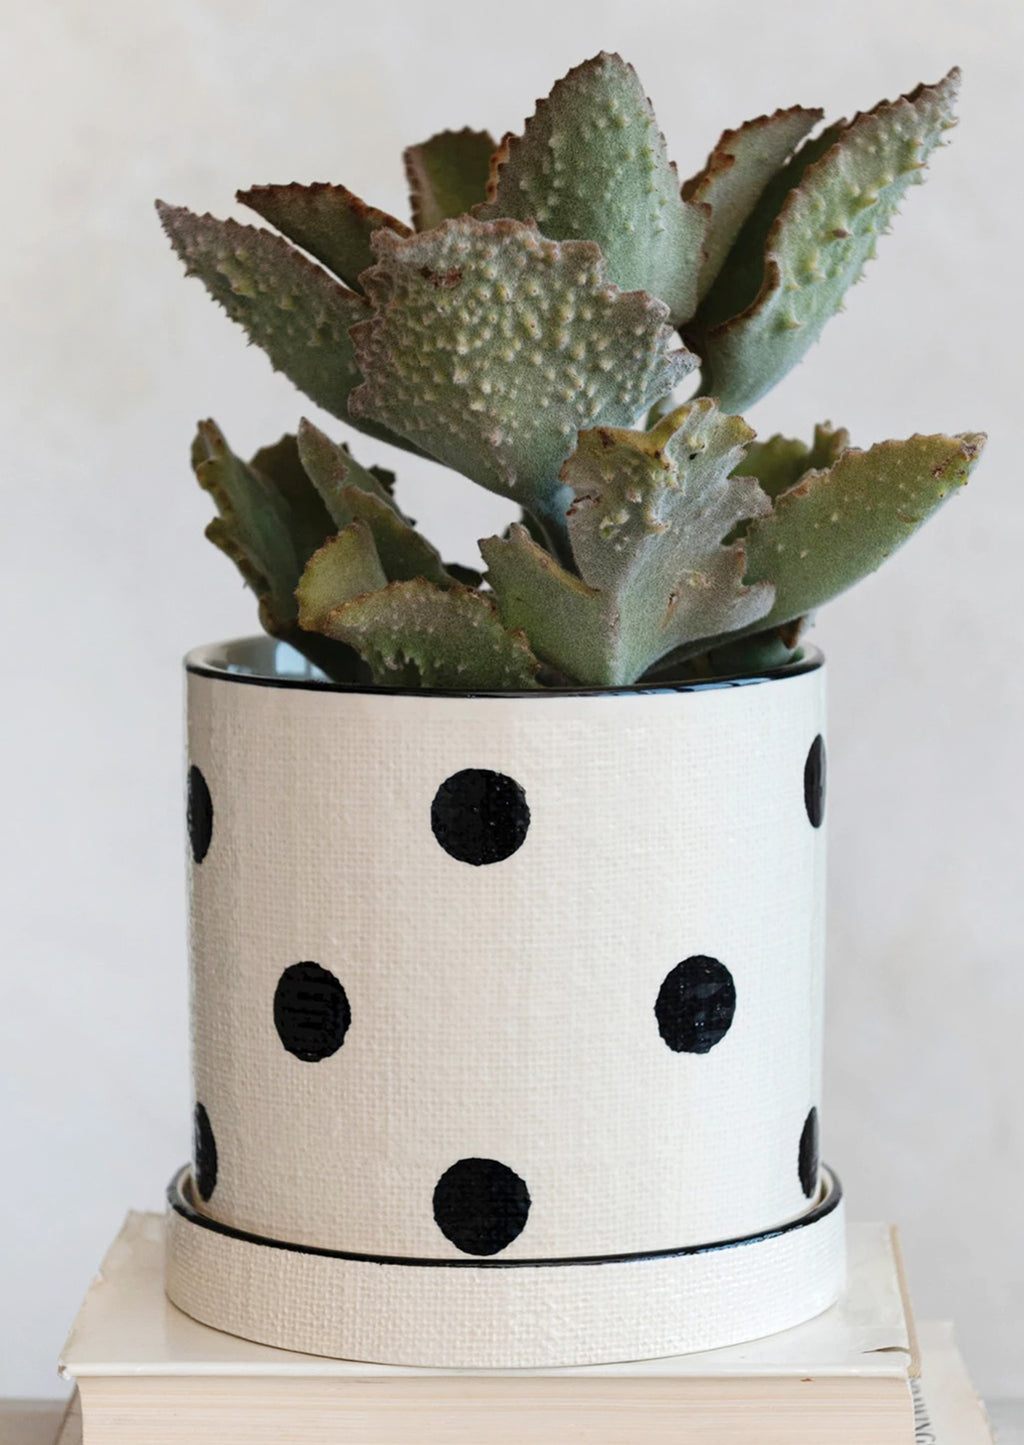 1: A polka dot ceramic planter in white with black dots, linen texture.